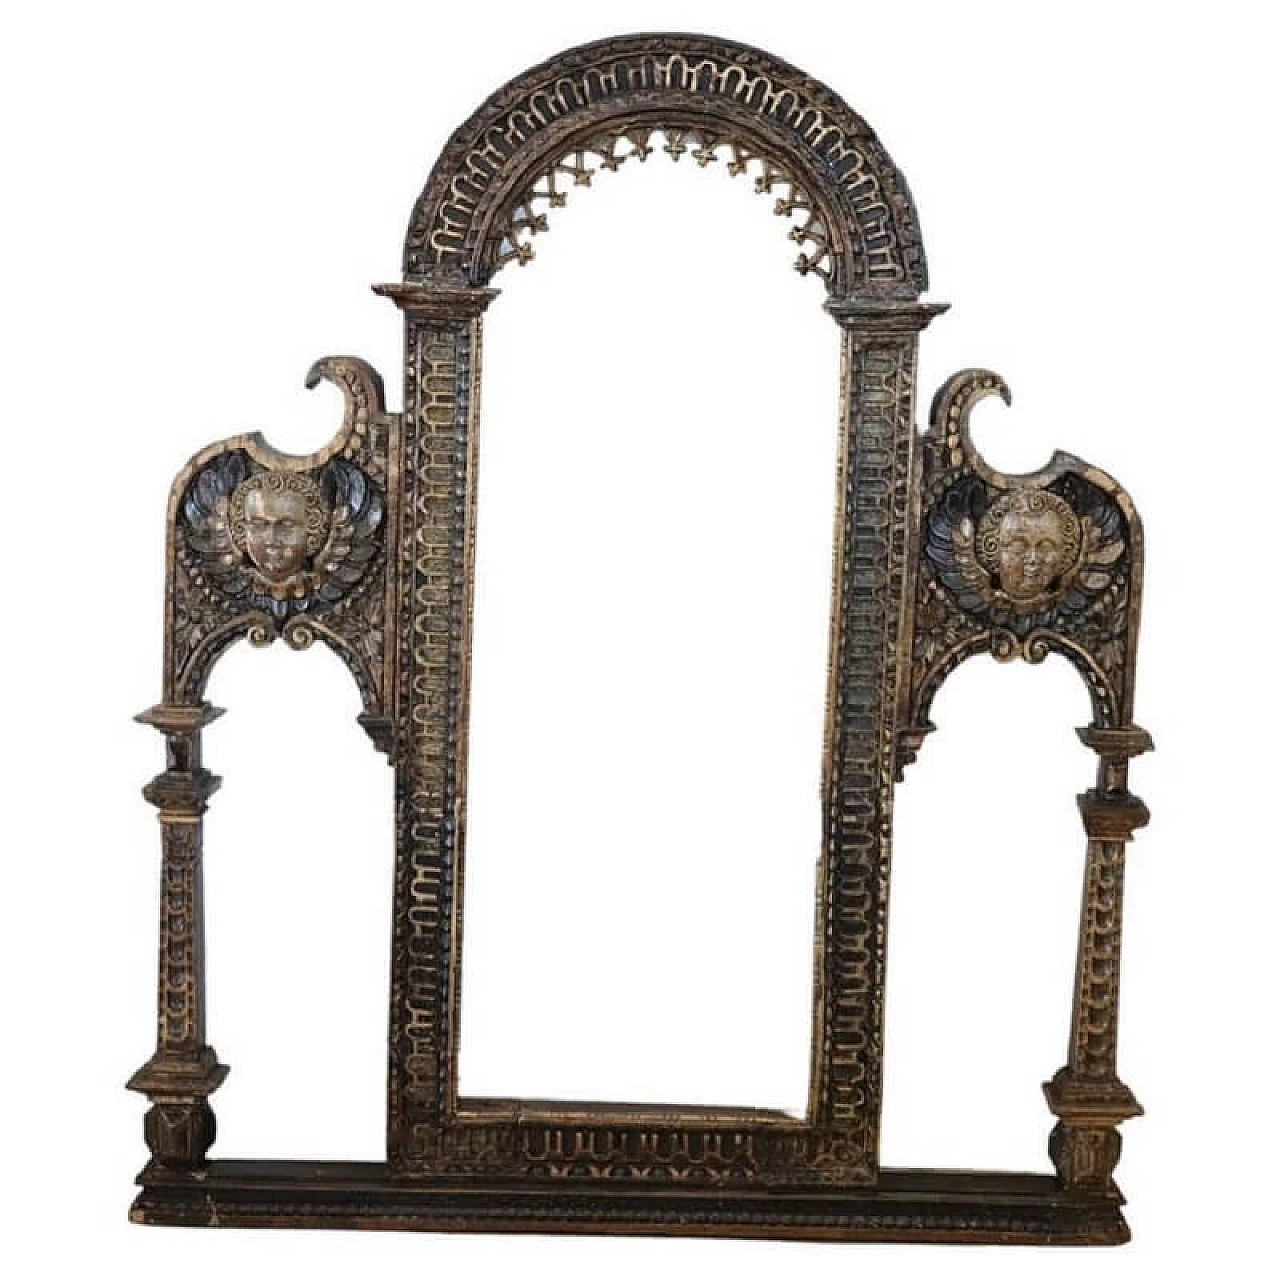 Antique three-arched hand-carved wooden frame, mid-18th century 1